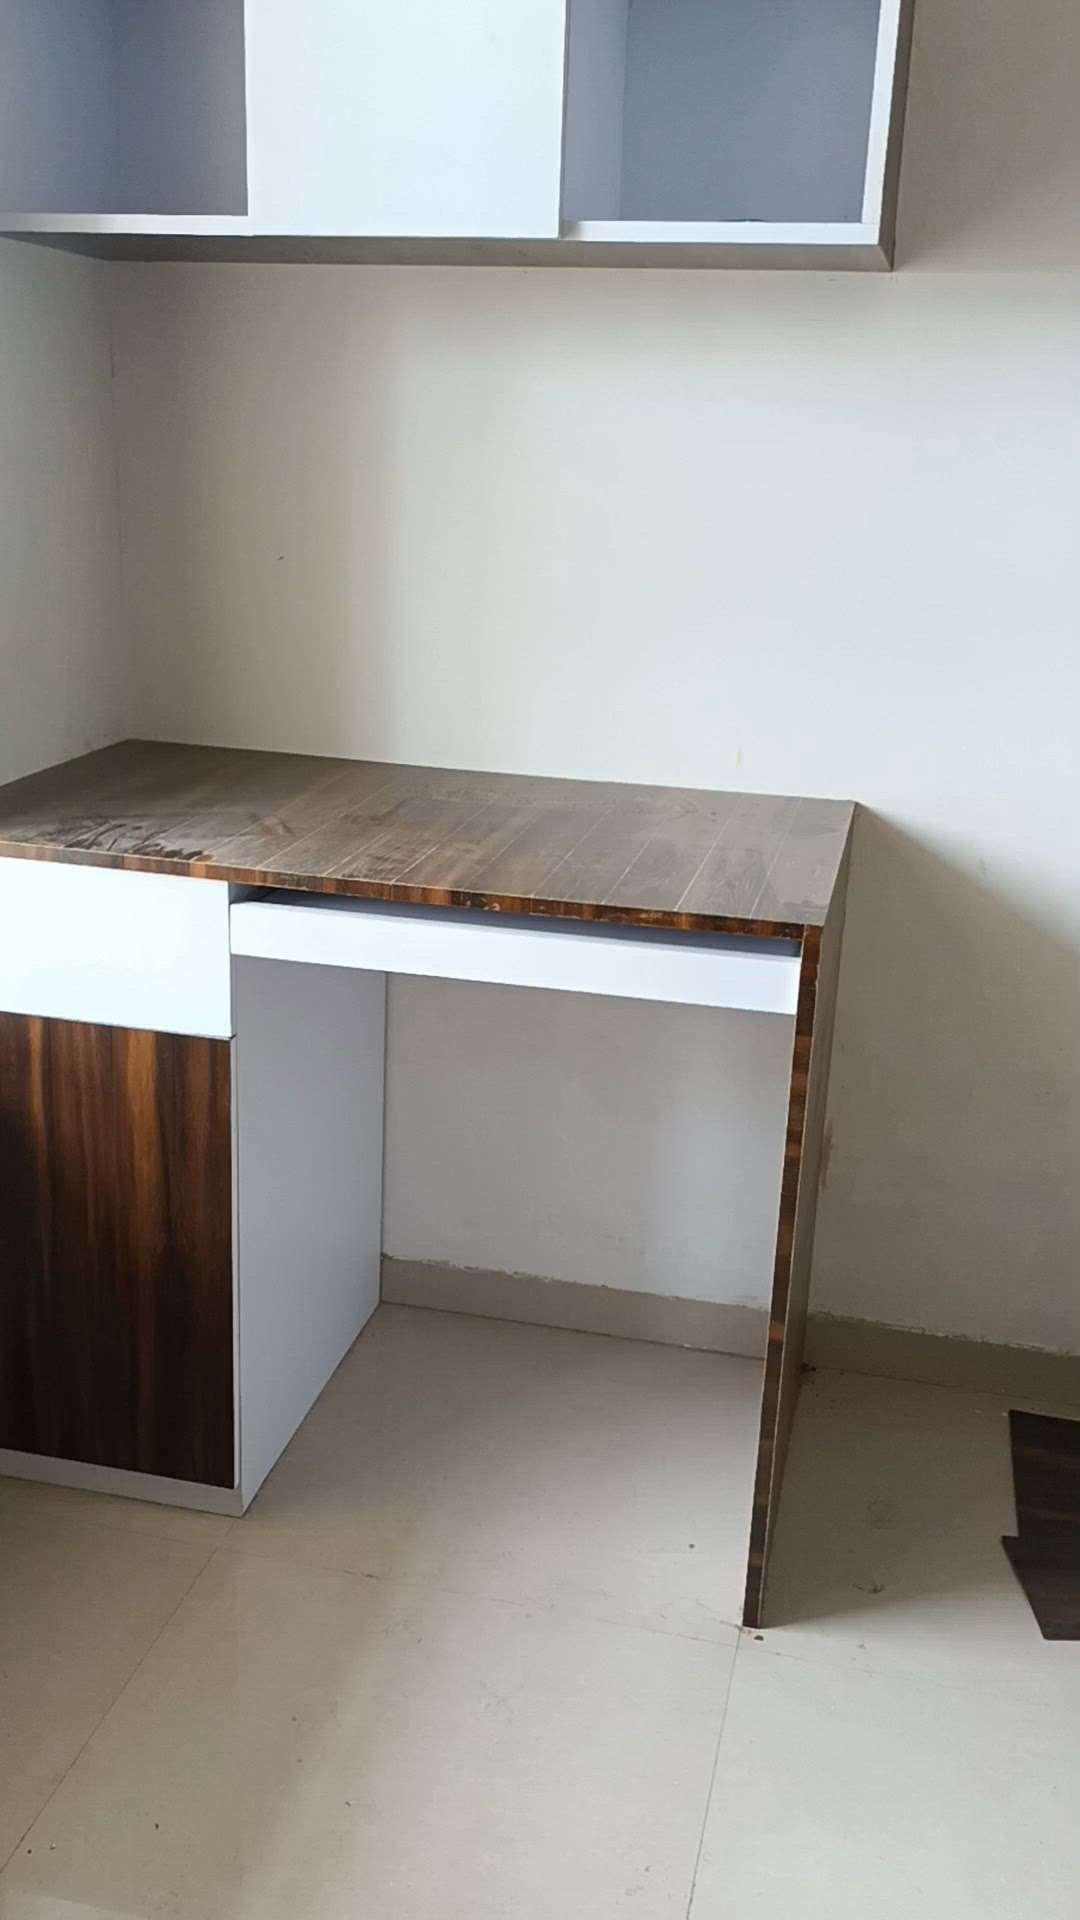 #my contact number 7440465749 any carpenter work call me bhopal and another siti good rates labaur rates and with material work available...





 #KitchenIdeas  #ClosedKitchen  #50LakhHouse  #RoseGarden  #NoCarpenter  #NorthFacingPlan  #FoldingDoors  #GraniteFloors  #MixedRoofHouse